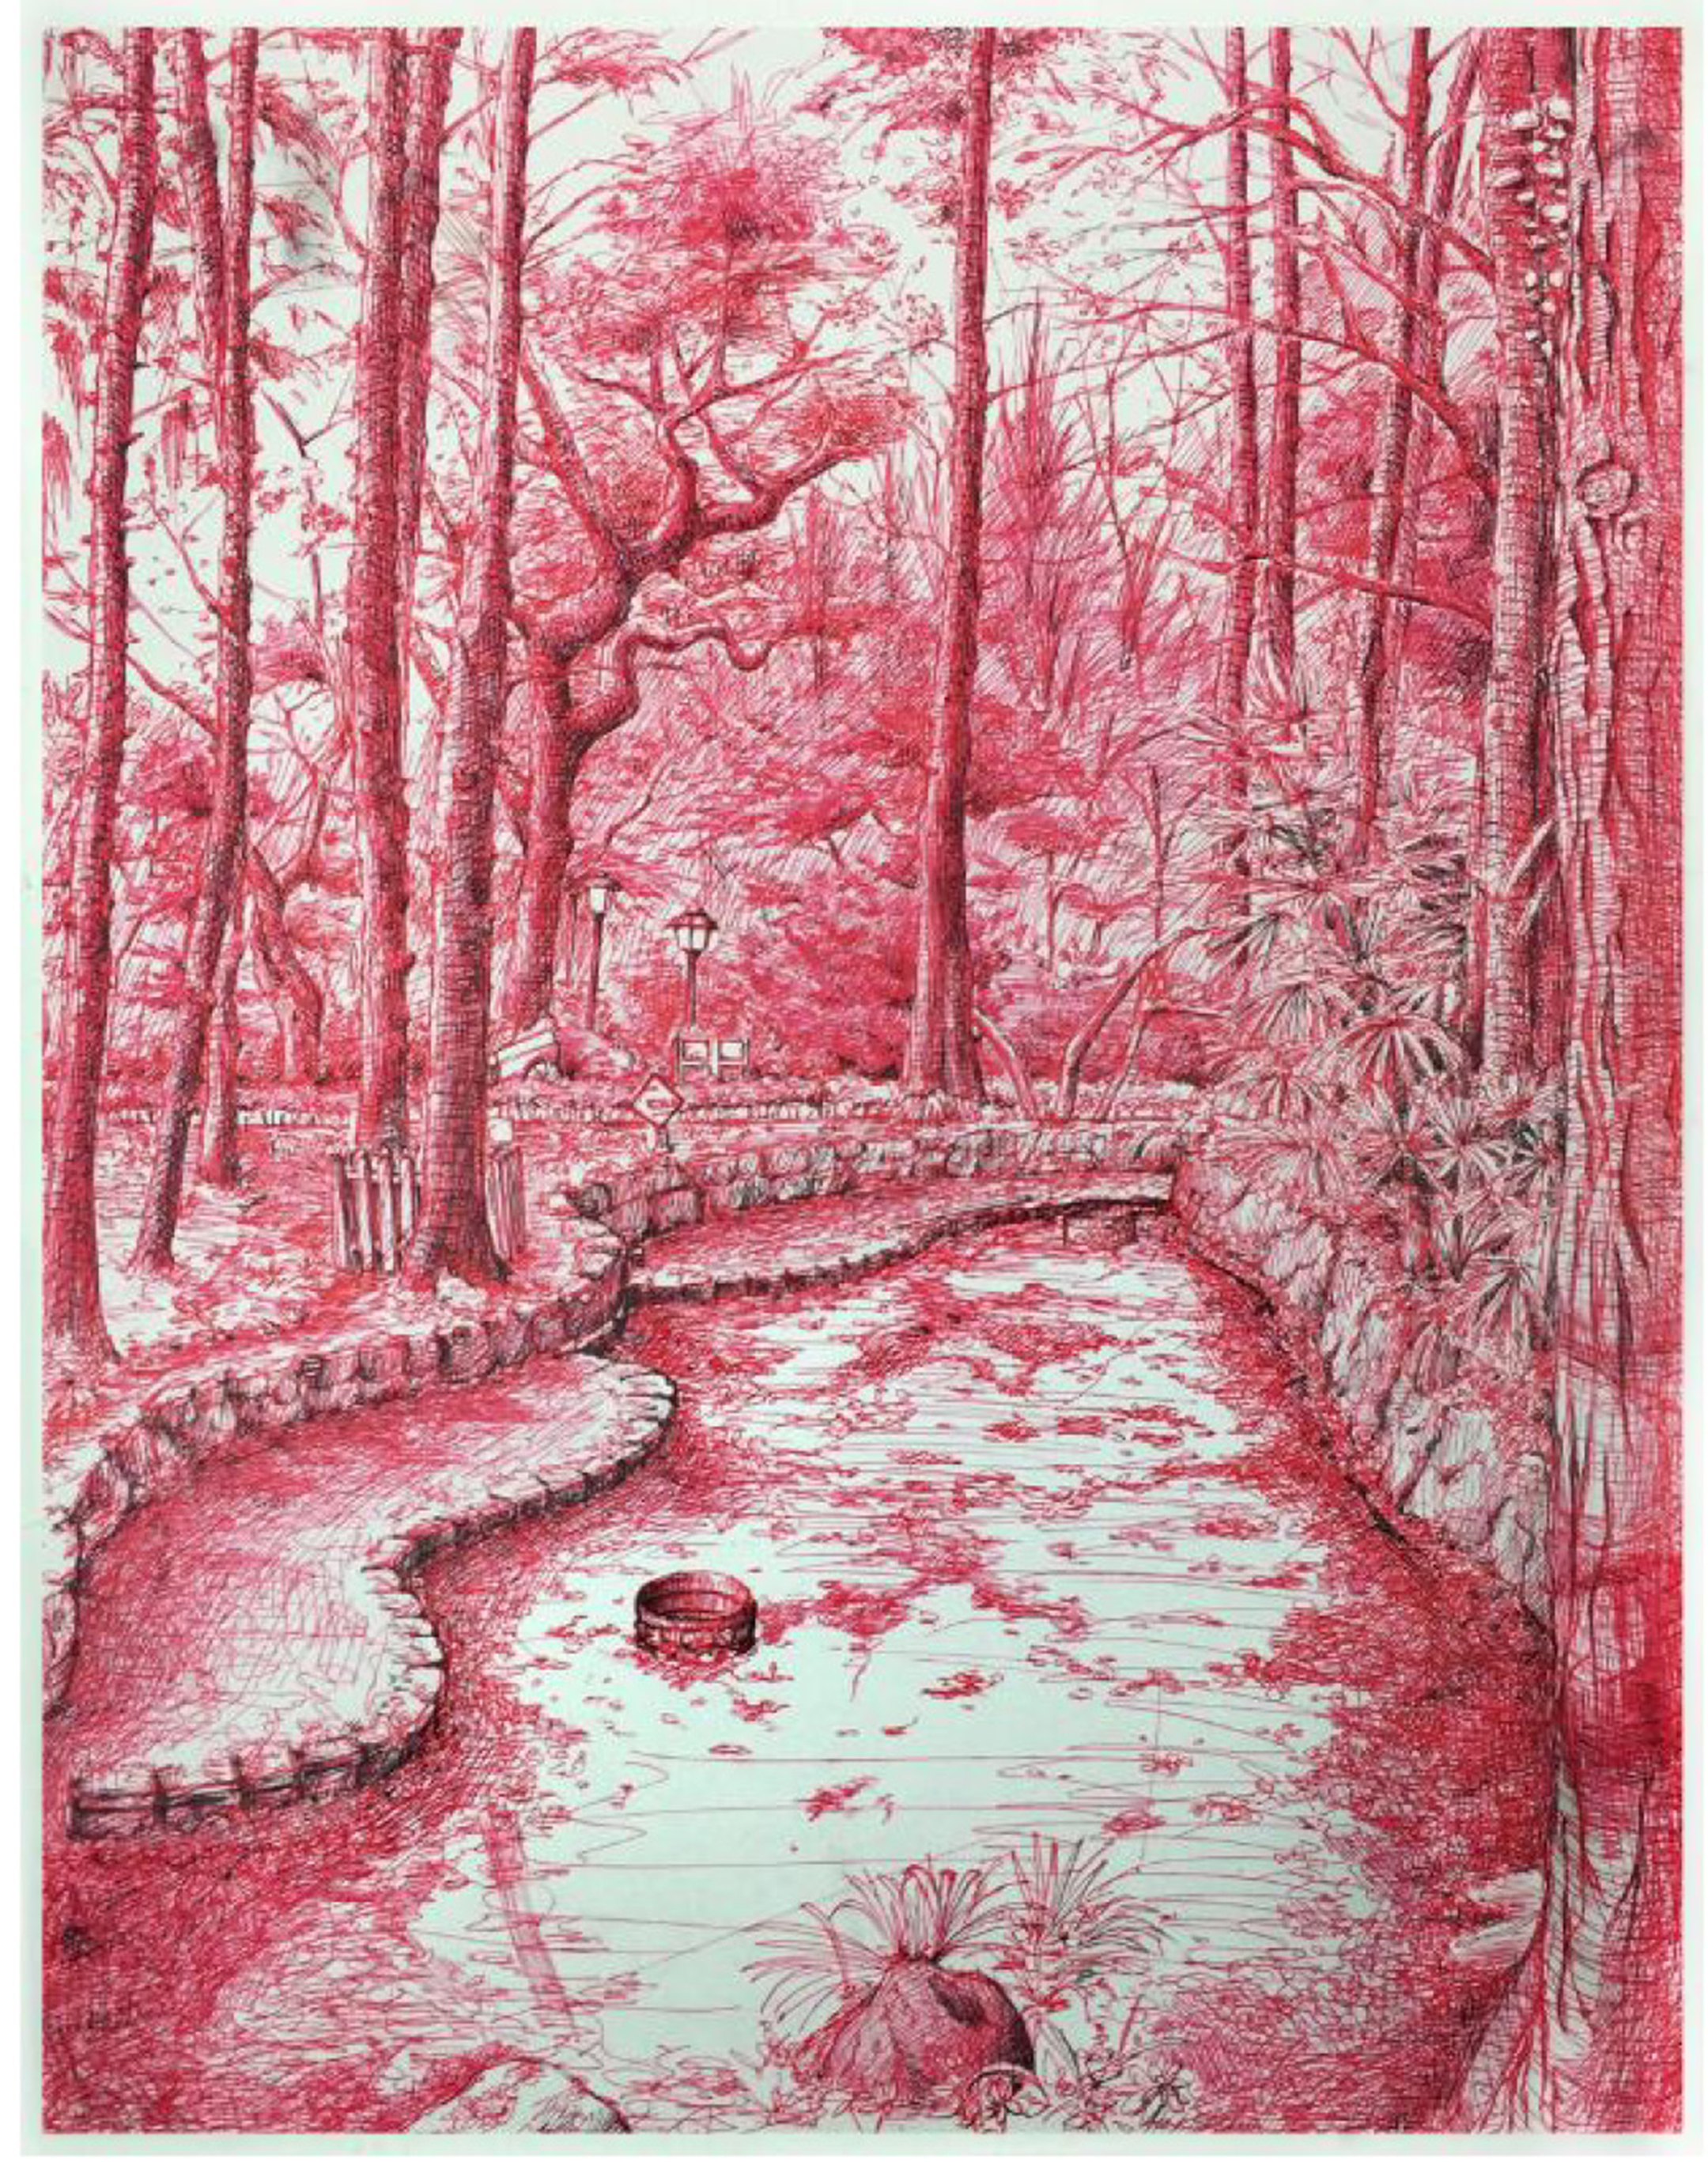 Nature illustration of a forest and stream in red and white